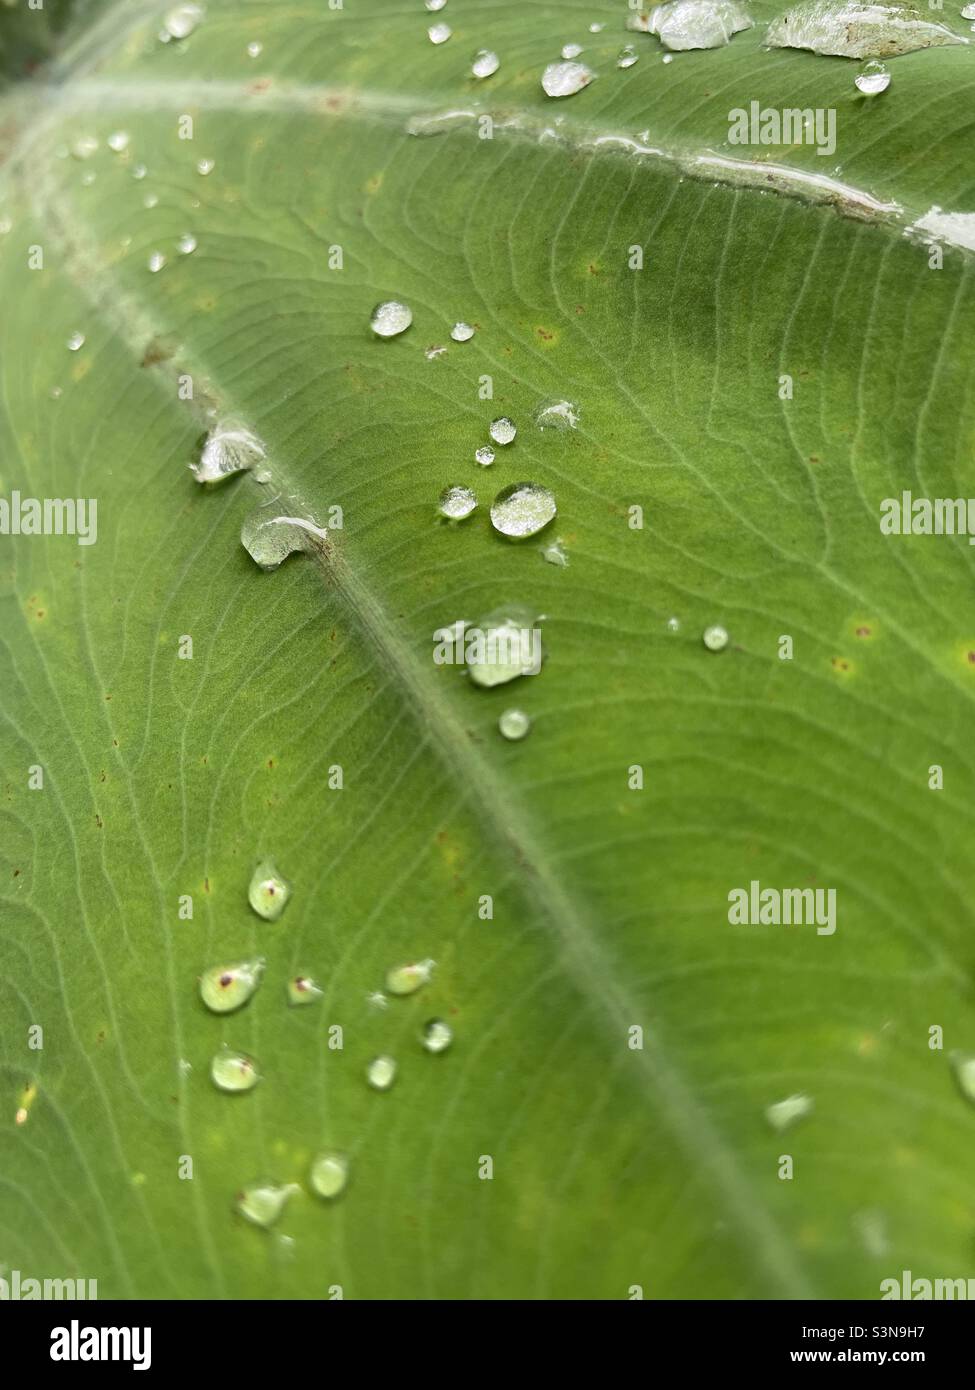 Water droplets on a leaf Stock Photo